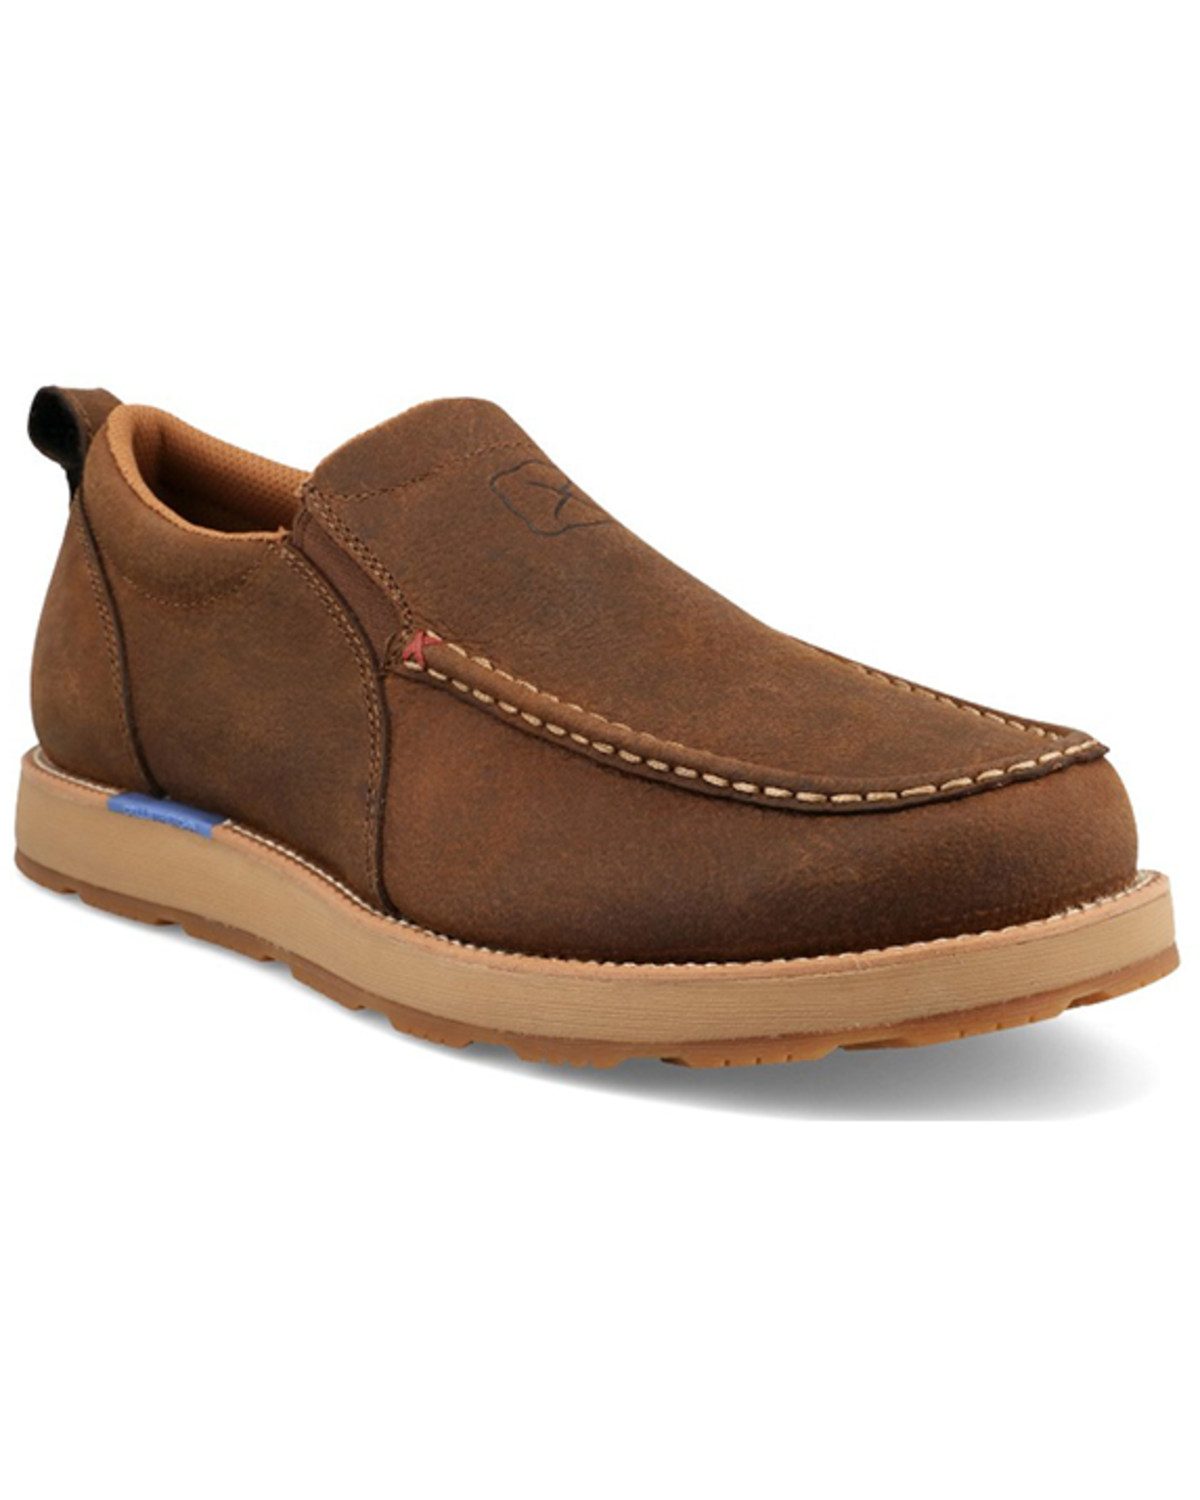 Twisted X Men's Cellstretch Wedge Sole Slip-On Casual Shoes - Moc Toe